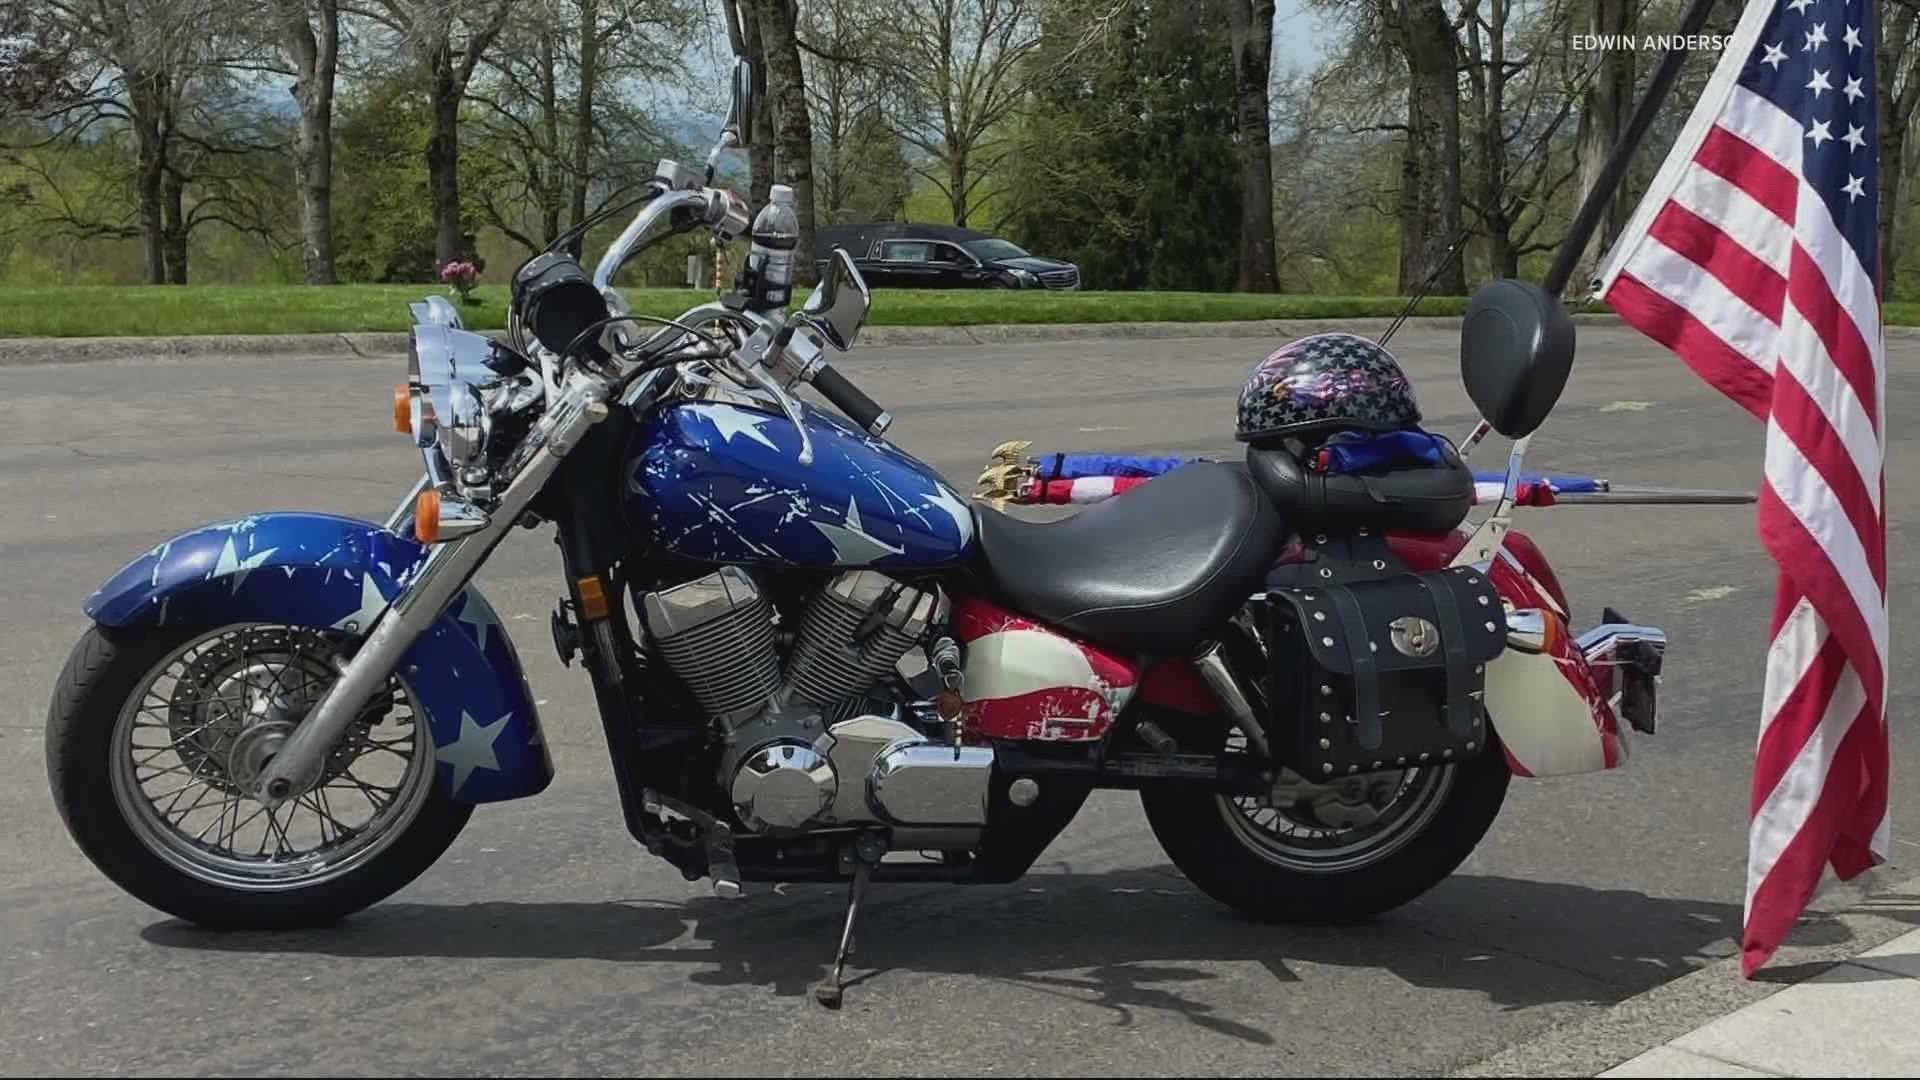 Edwin Anderson is a Patriot Guard Rider. Normally he would ride his bike out to honor soldiers who died while in service.